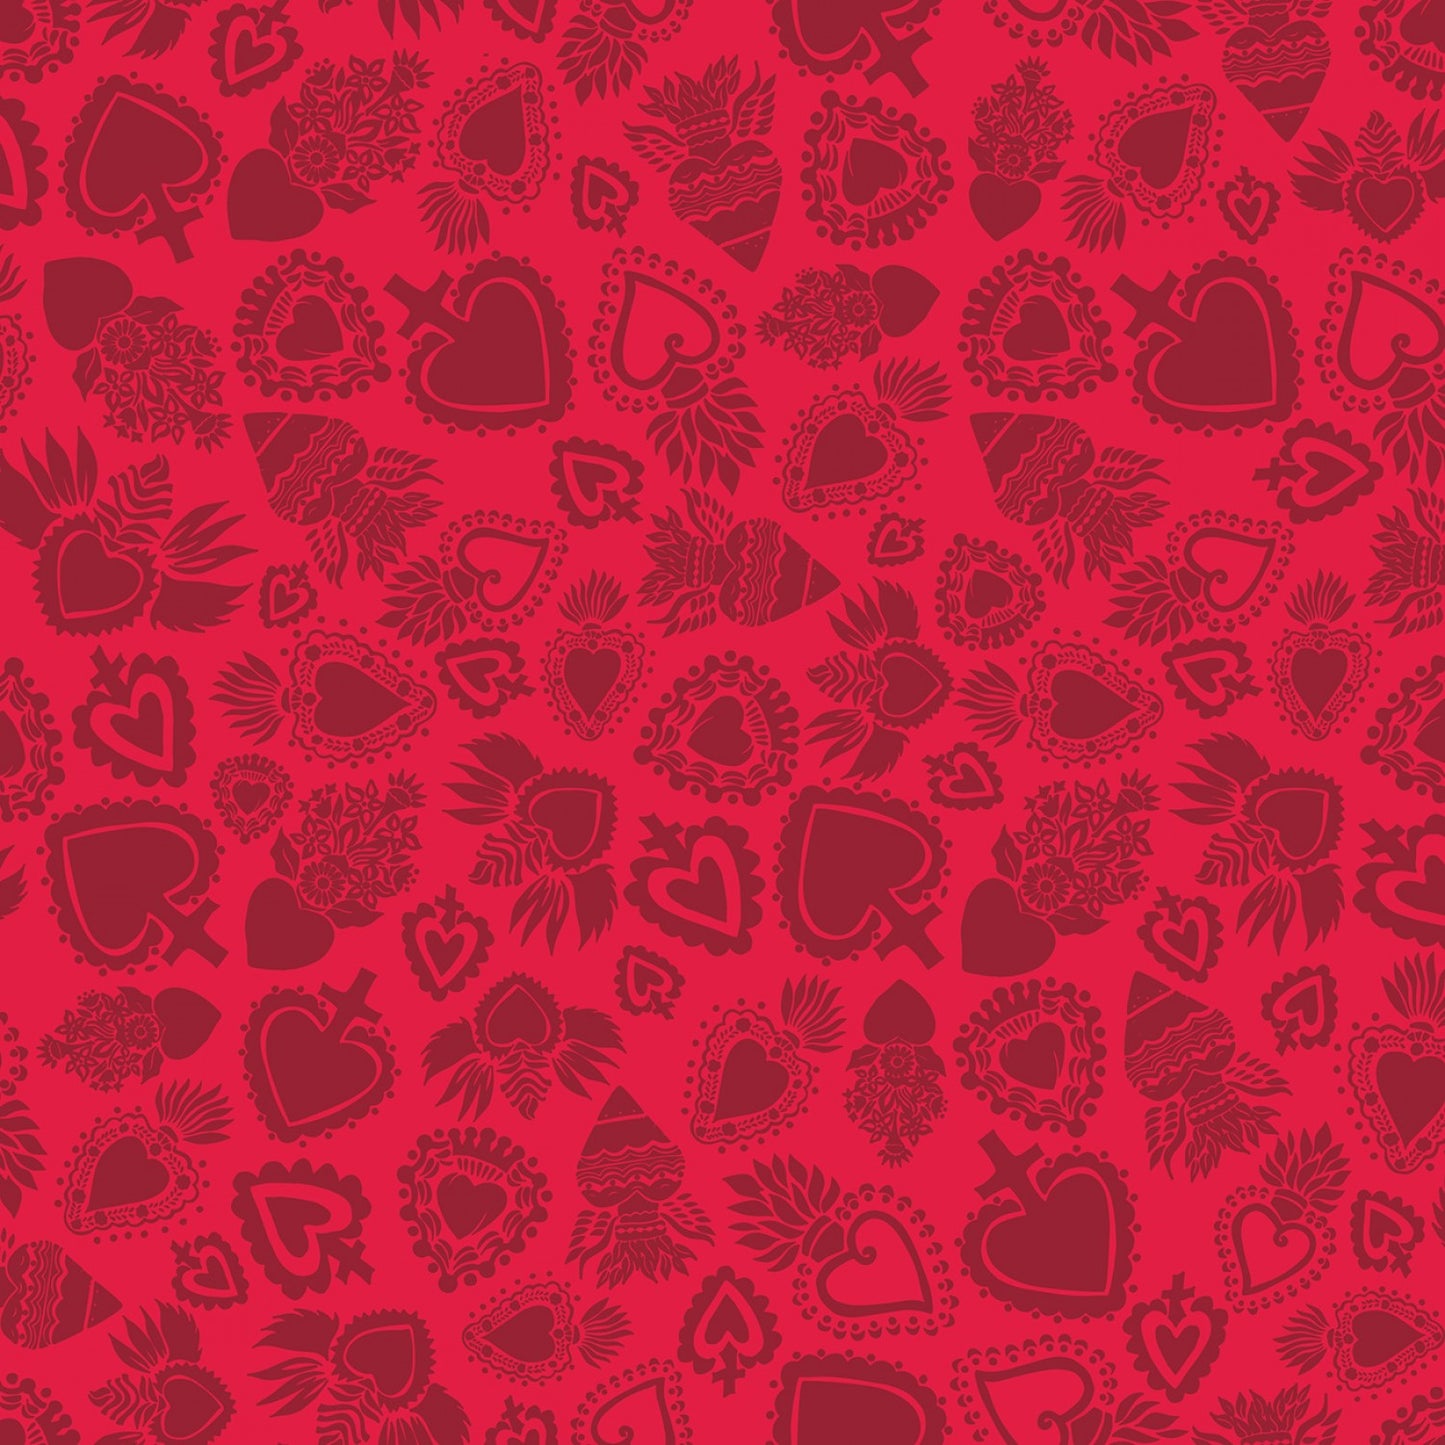 Amor Eterno by Crafty Chica Hearts Red    C11813R-RED Cotton Woven Fabric